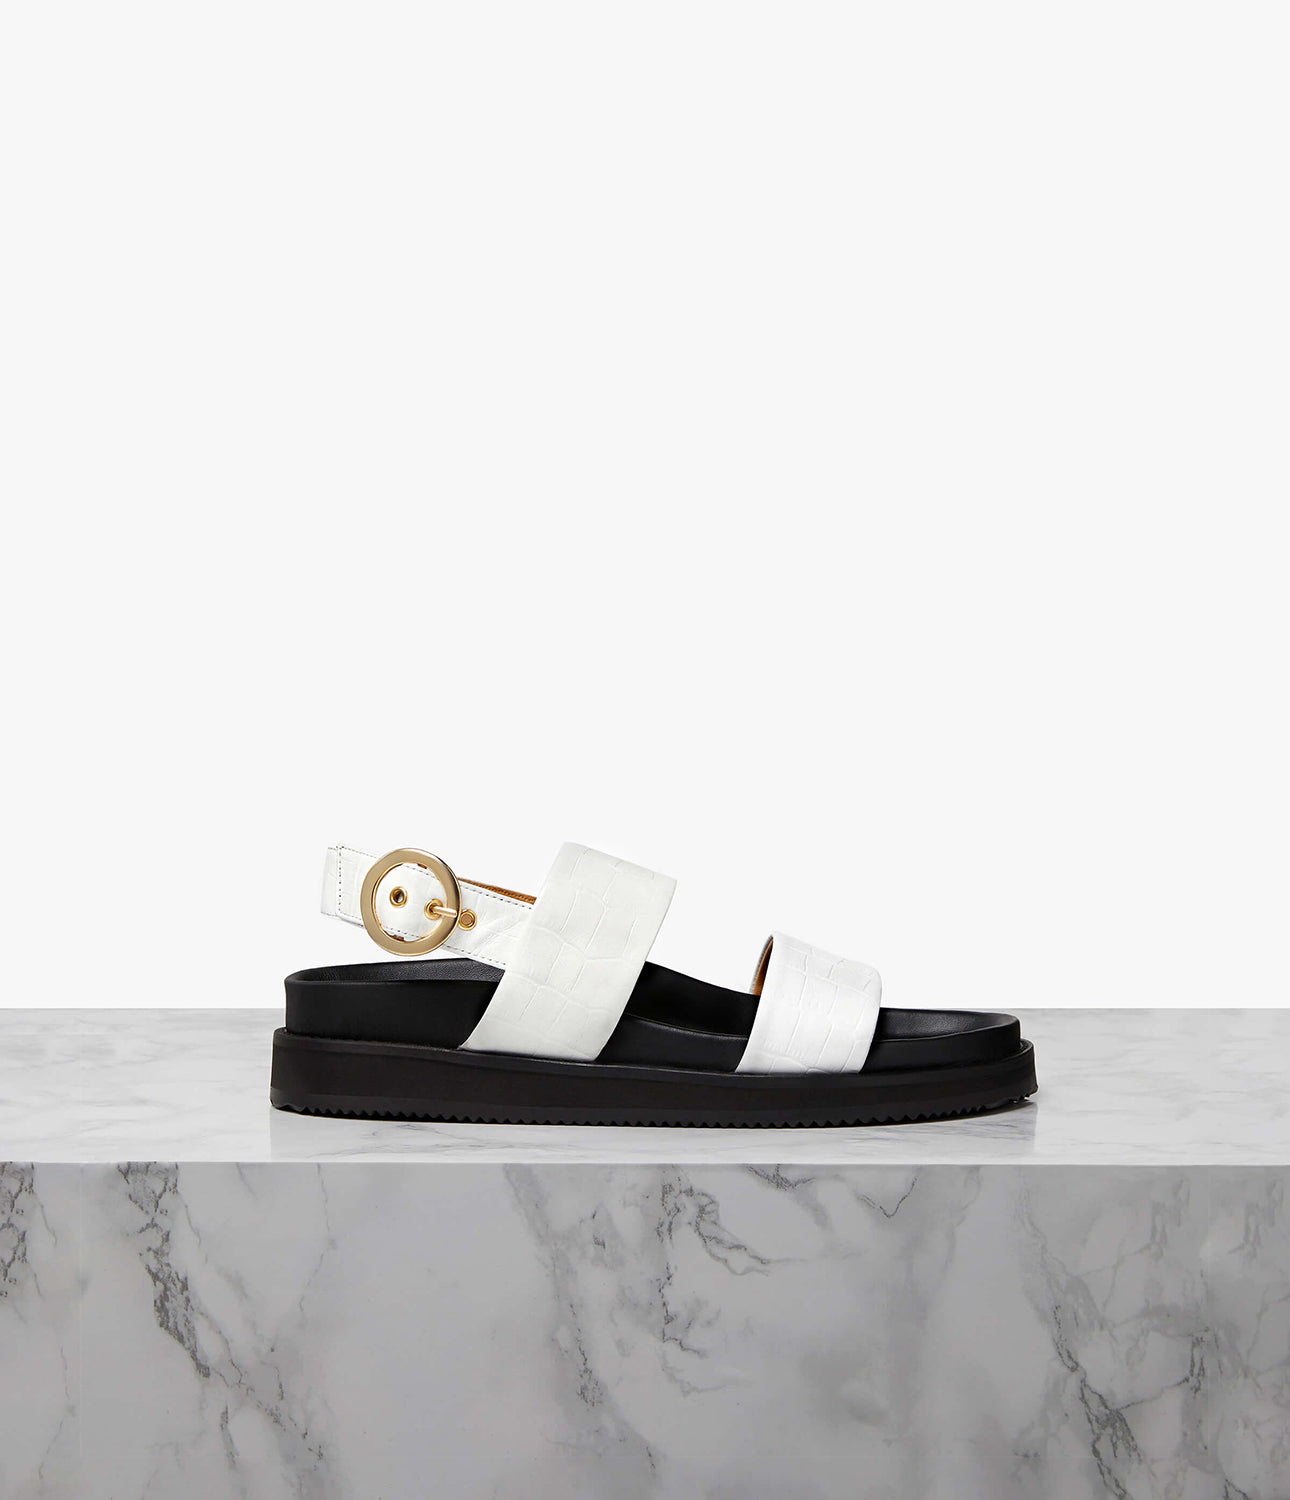 An elevated update to the sports slide, the Zephyr sandal is an everyday design classic with an athleisure twist. Set on a sturdy rubber sole, the ergonomic leather-covered footbed provides ample support for a day on your feet. Finished with a double-front strap to hold the foot in place, a cupped footbed design prevents sliding for a more conformed fit. Wear the Zephyr in the city now and pack it for holidays later.